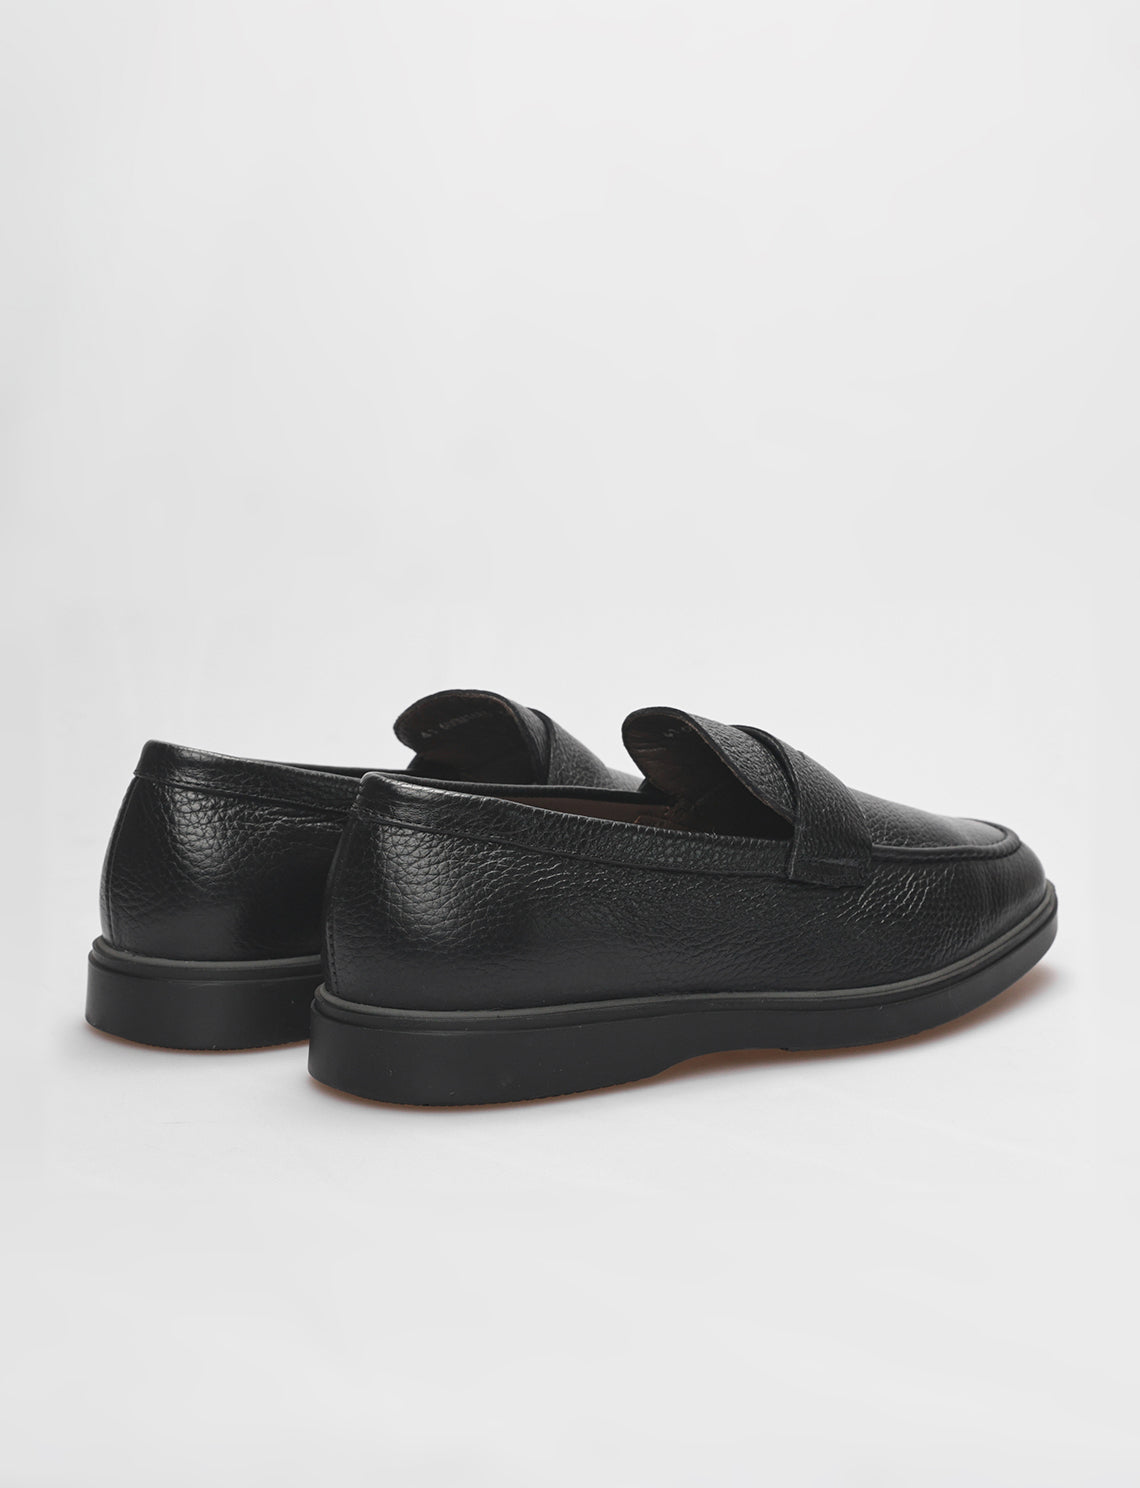 Men Black Genuine Leather Casual Loafers